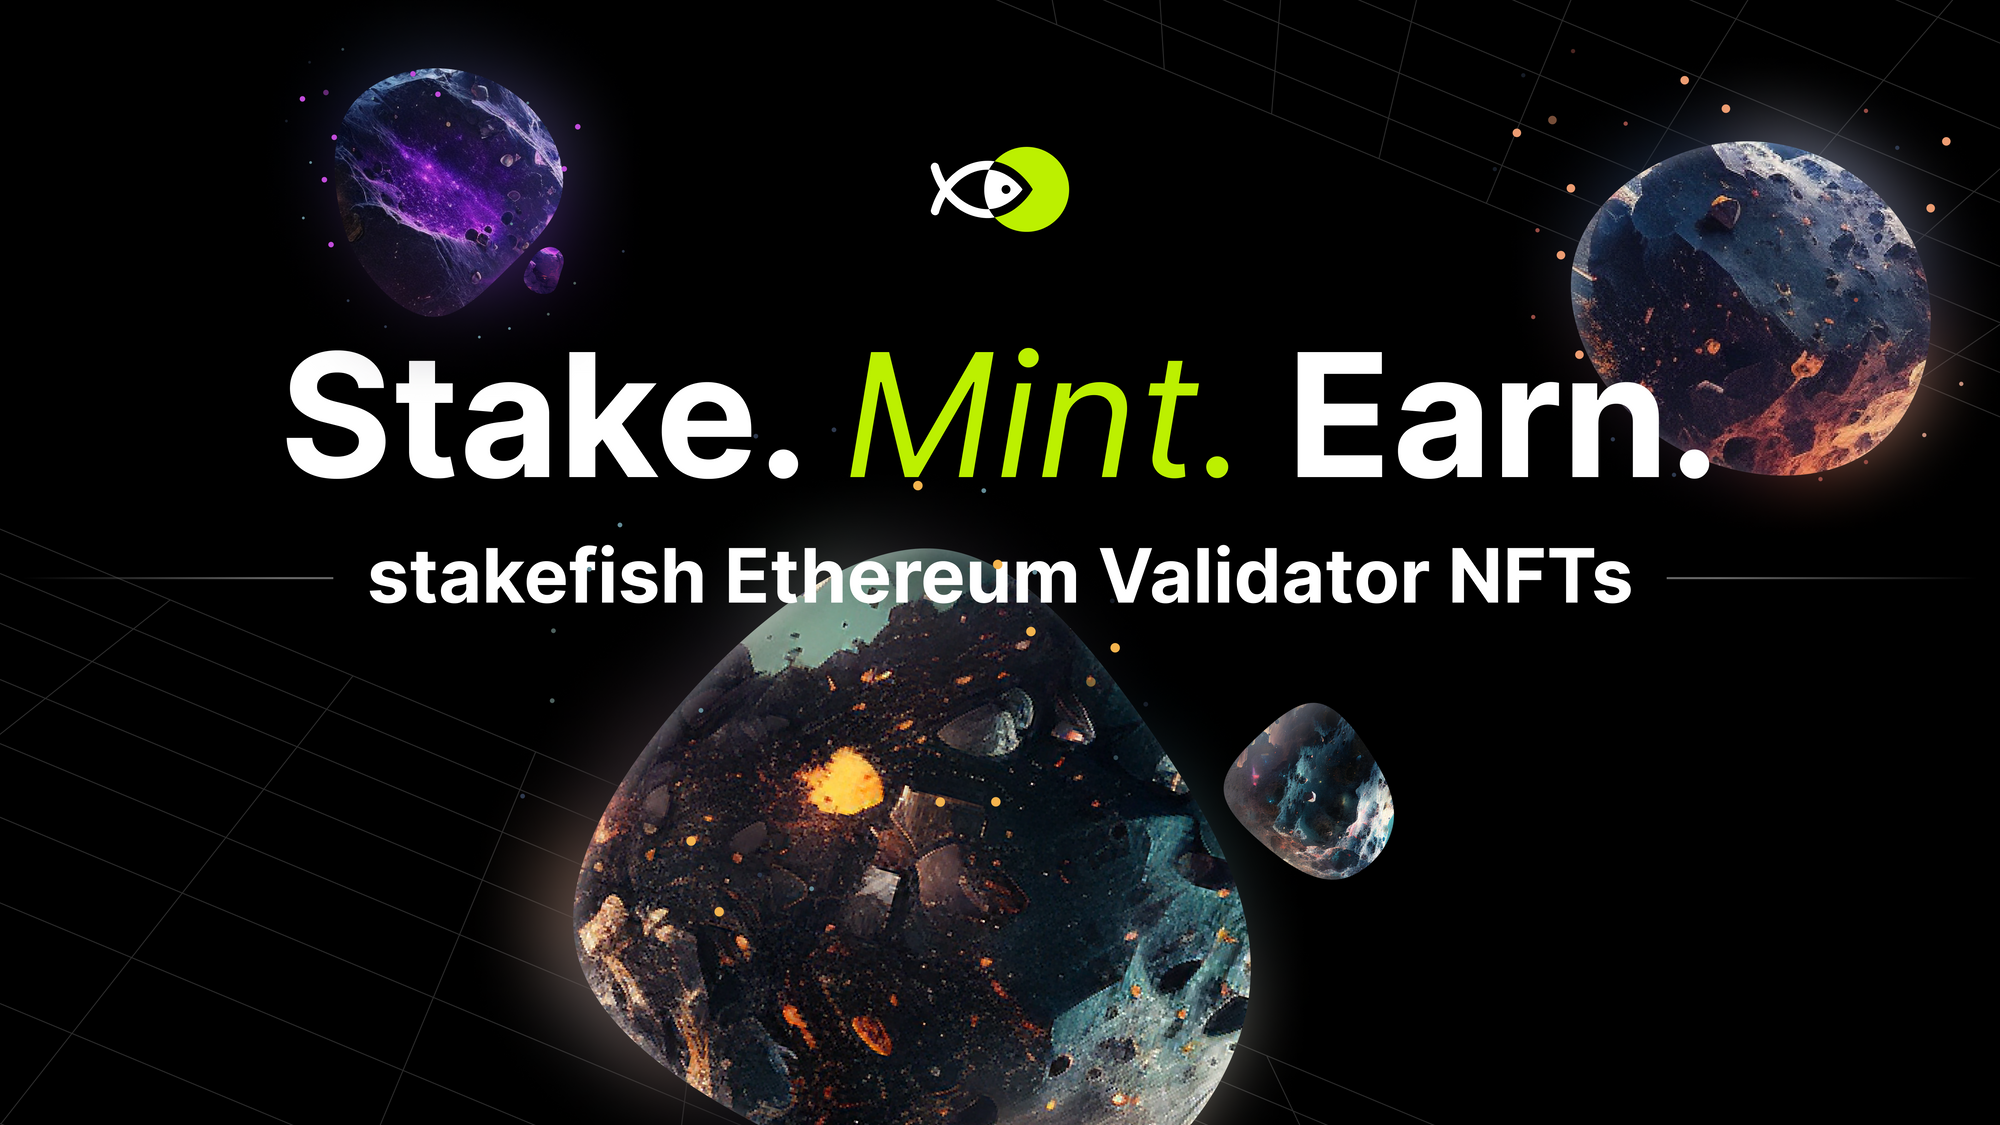 stakefish Ethereum Validator NFTs are coming.